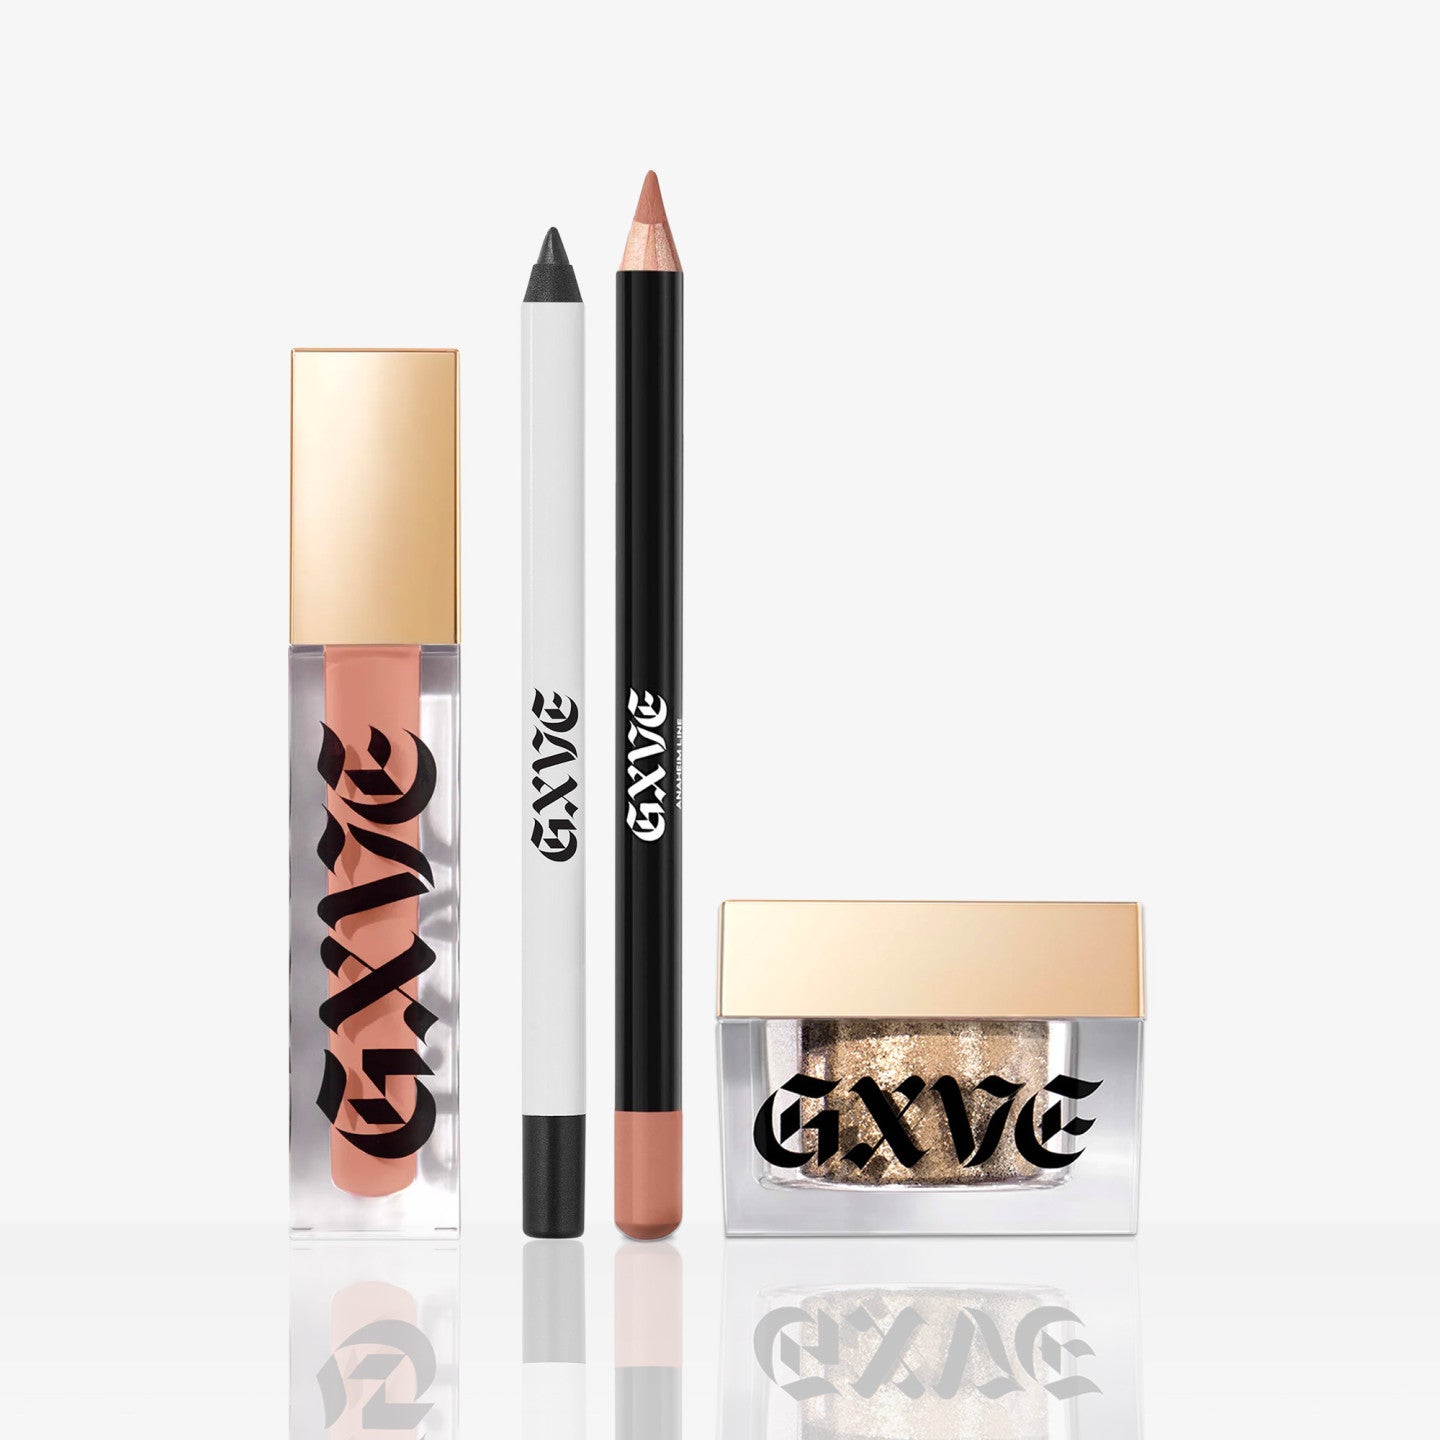 GXVE A natural touch makeup kit - 